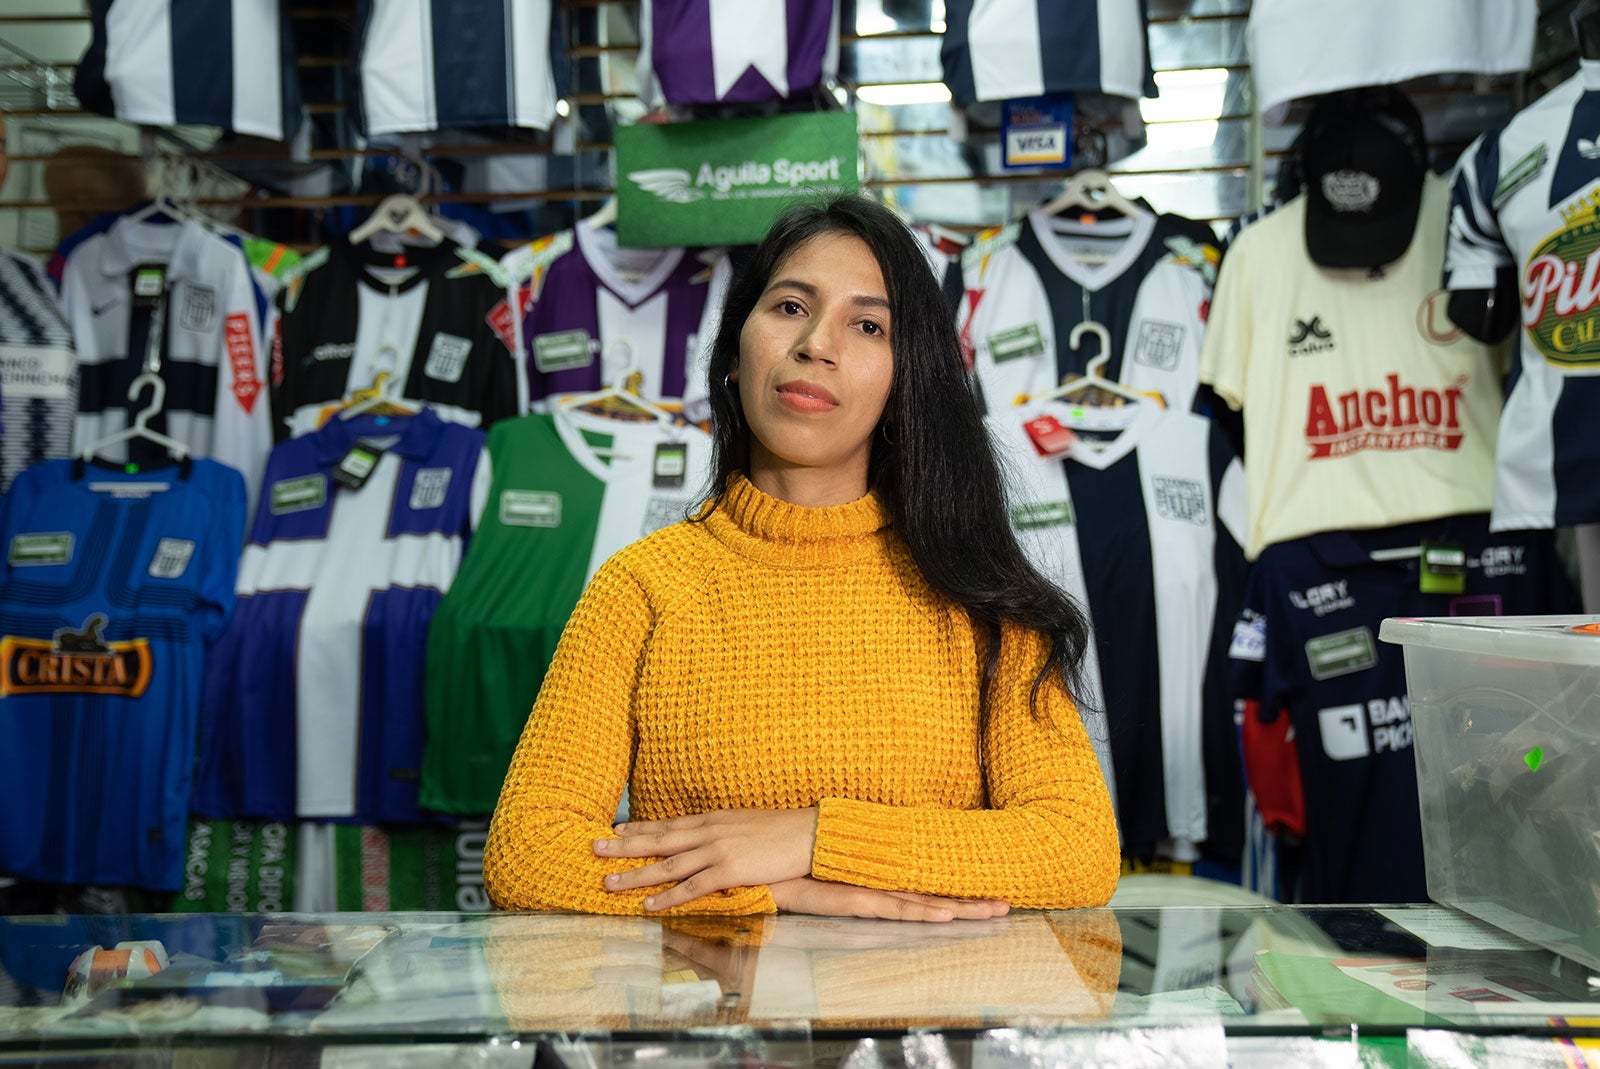 A Peruvian woman wearing a gold sweater stands at the counter in her store. Behind her are rows of hanging jerseys.